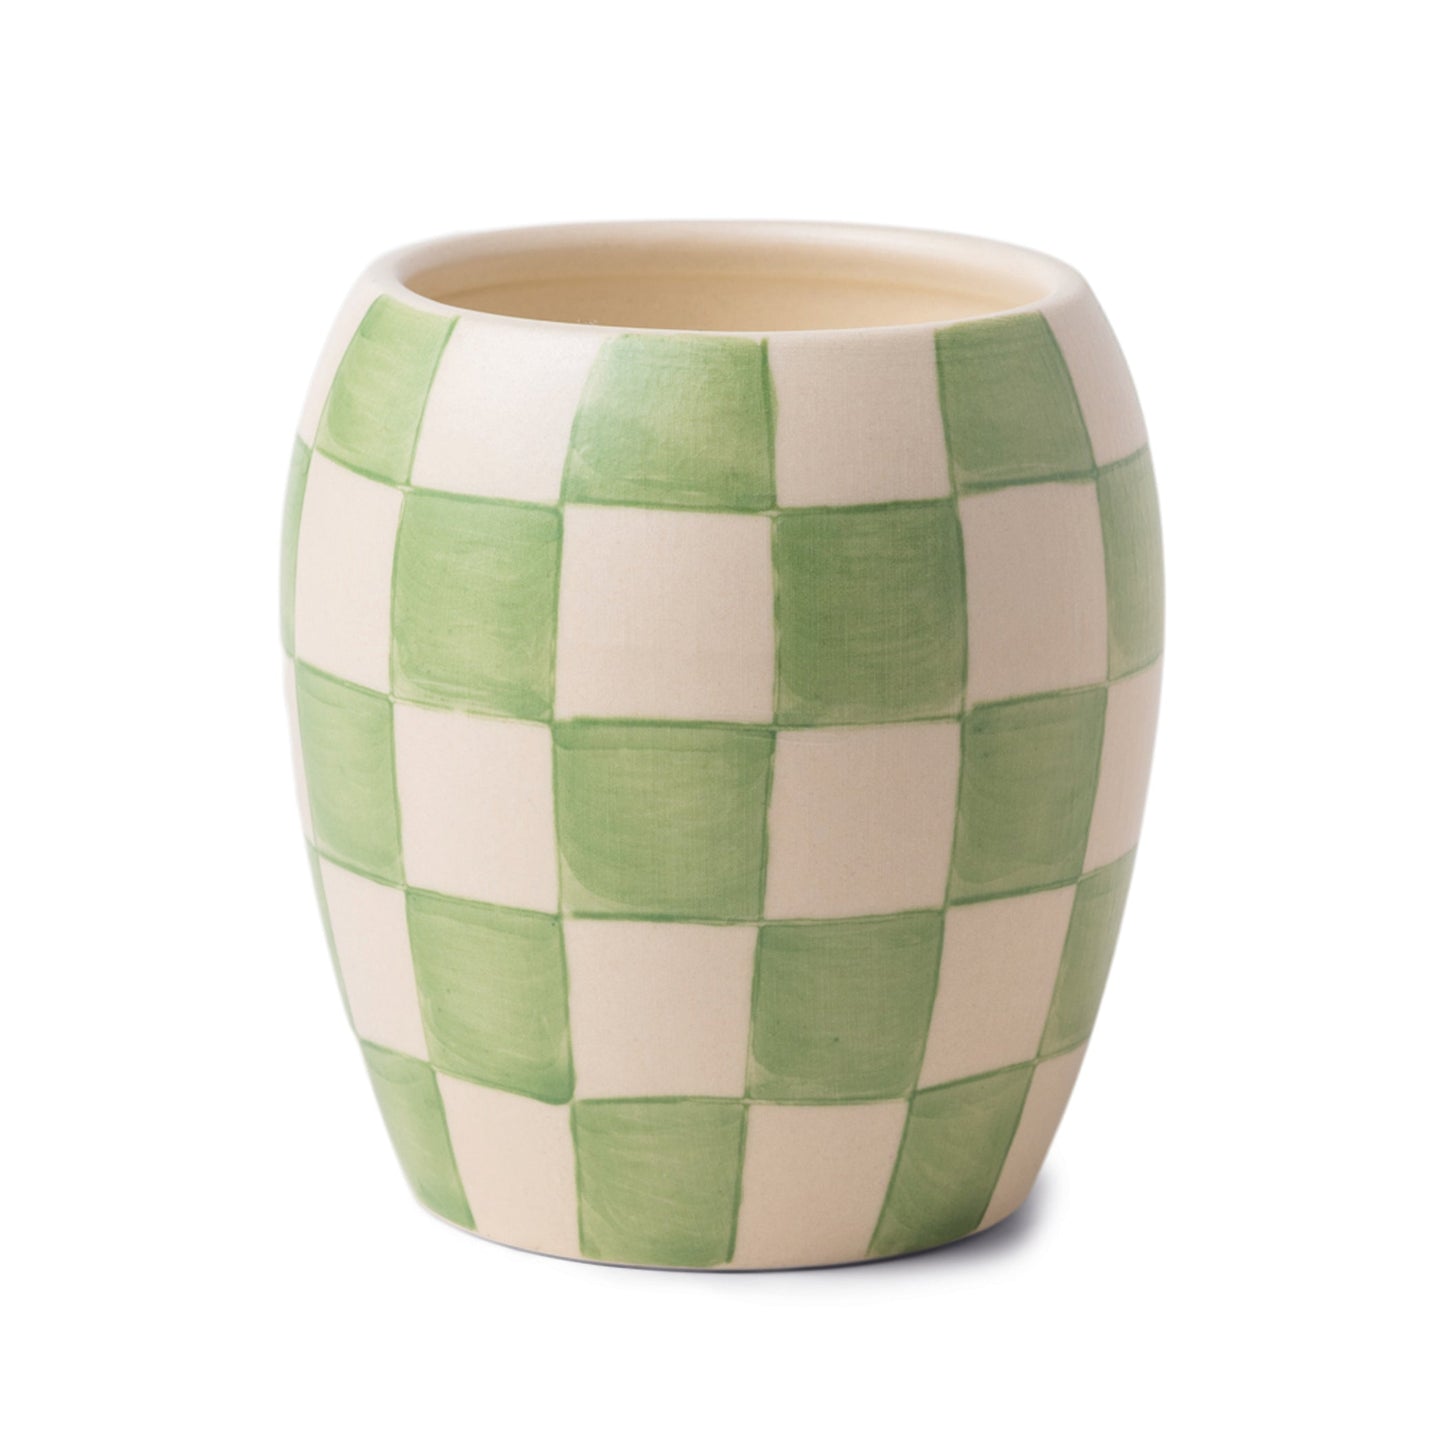 Checkmate 311g Sage Checkered Porcelain Vessel With Dustcover - Cactus Flower